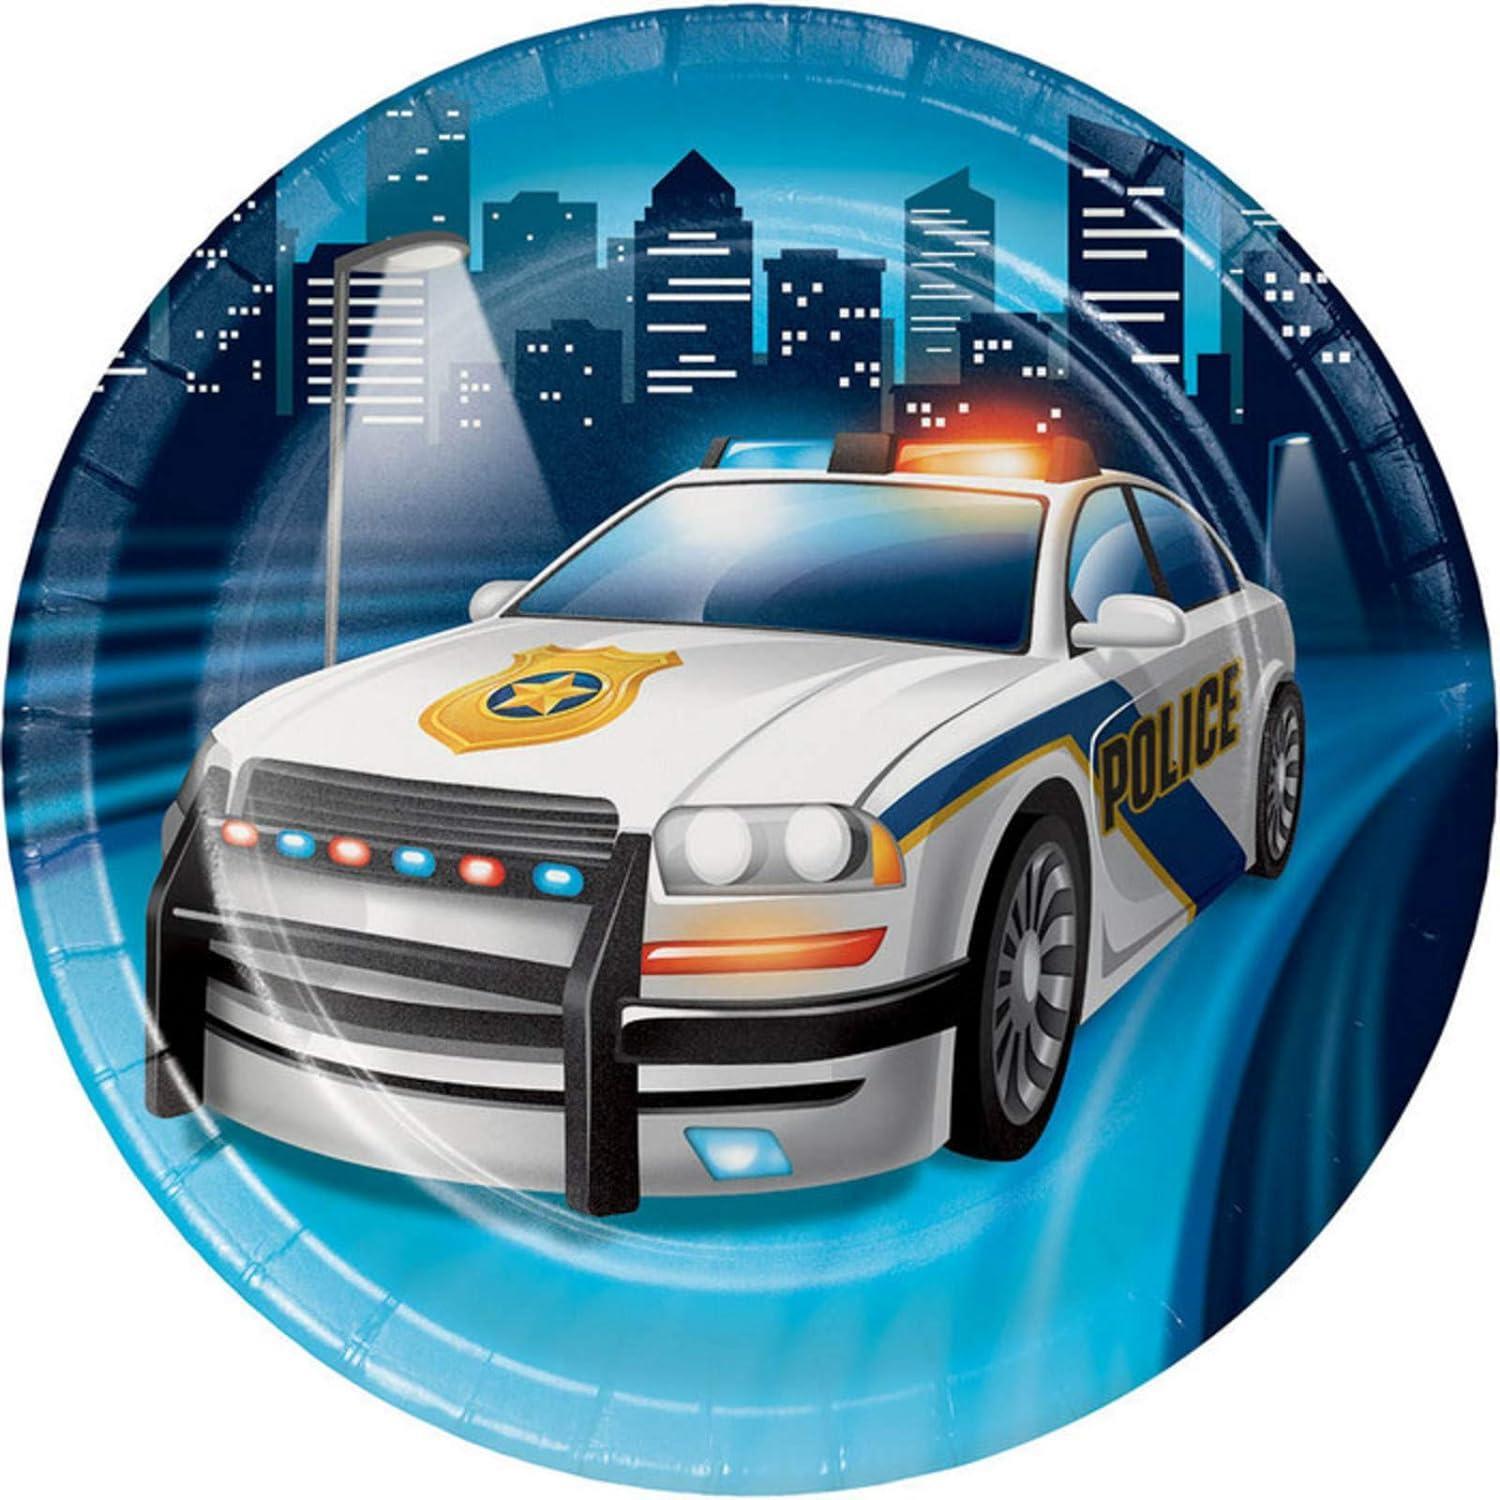 Creative Party Paper Police Car Party Plates (Pack of 8) (Blue/White/Red) (One Size)